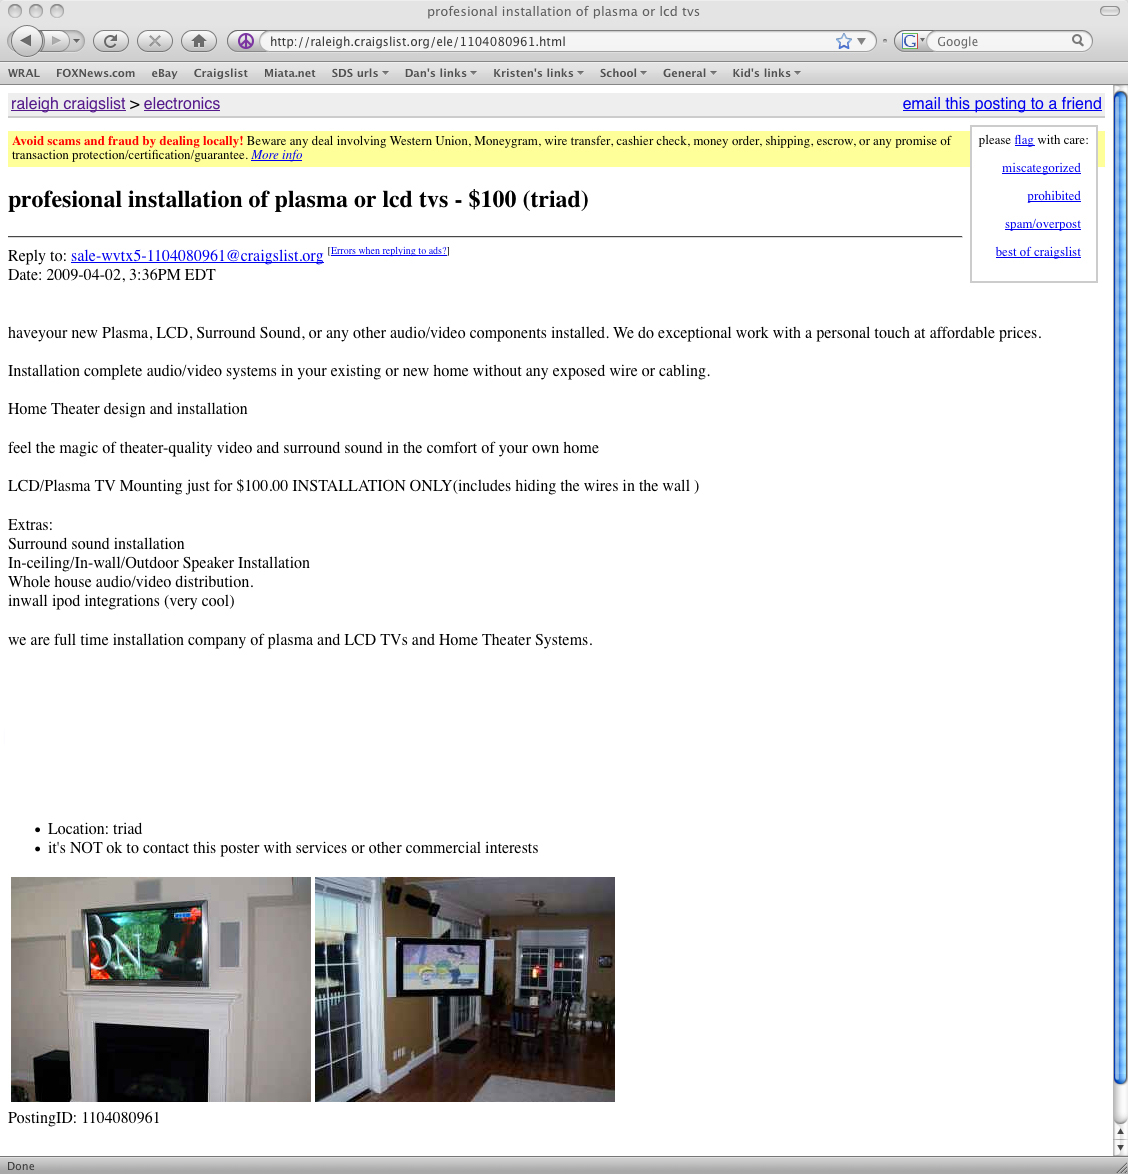 Craigs List ad featuring our portfolio piece claimed by someone else